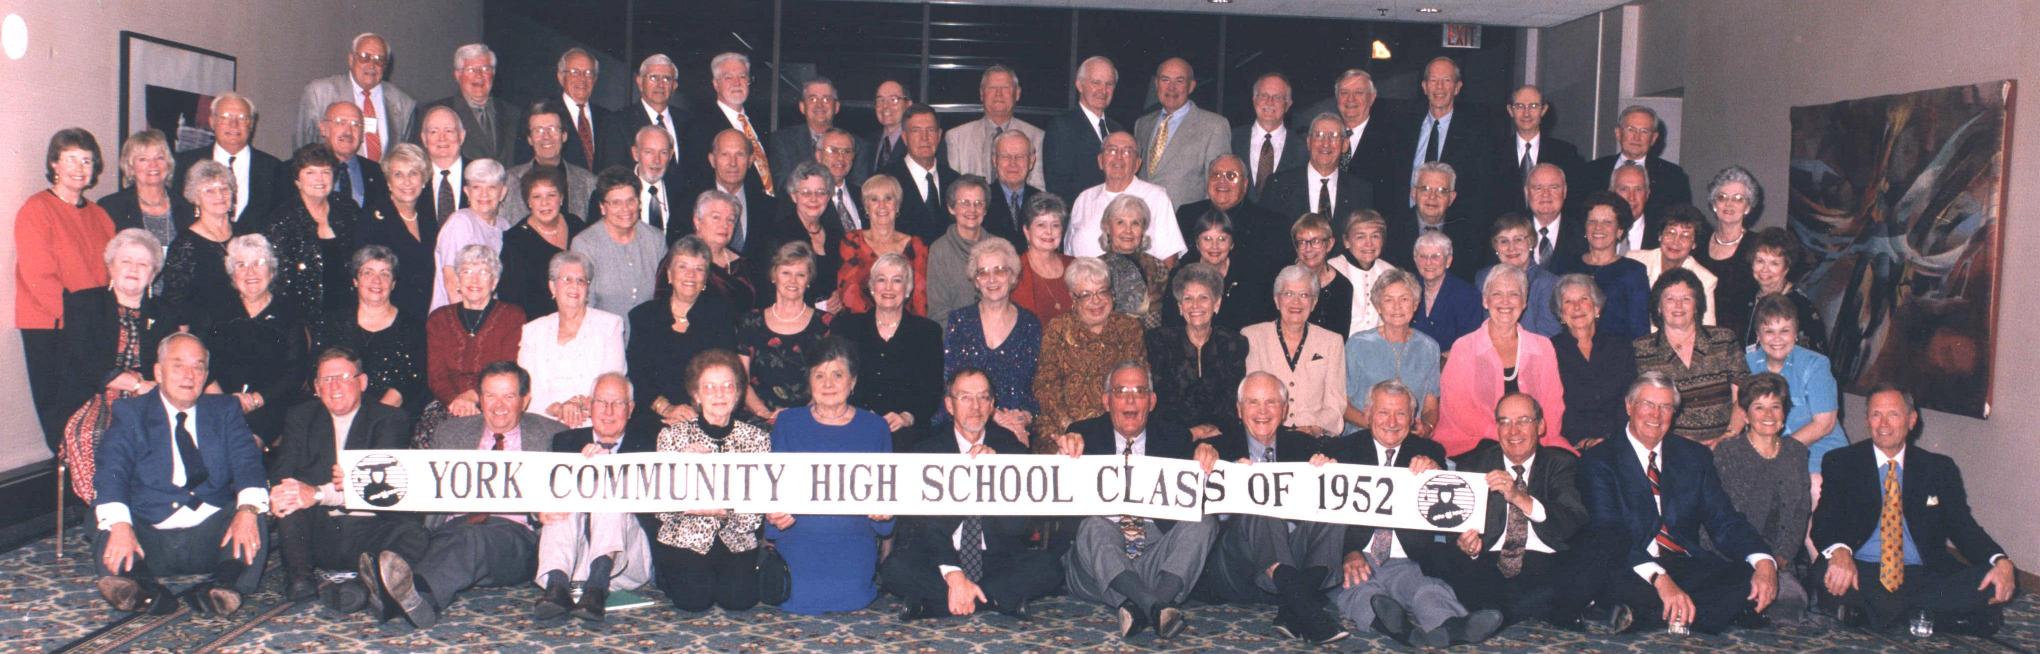 York H. S. Class of 1952 at its 50th Reunion 